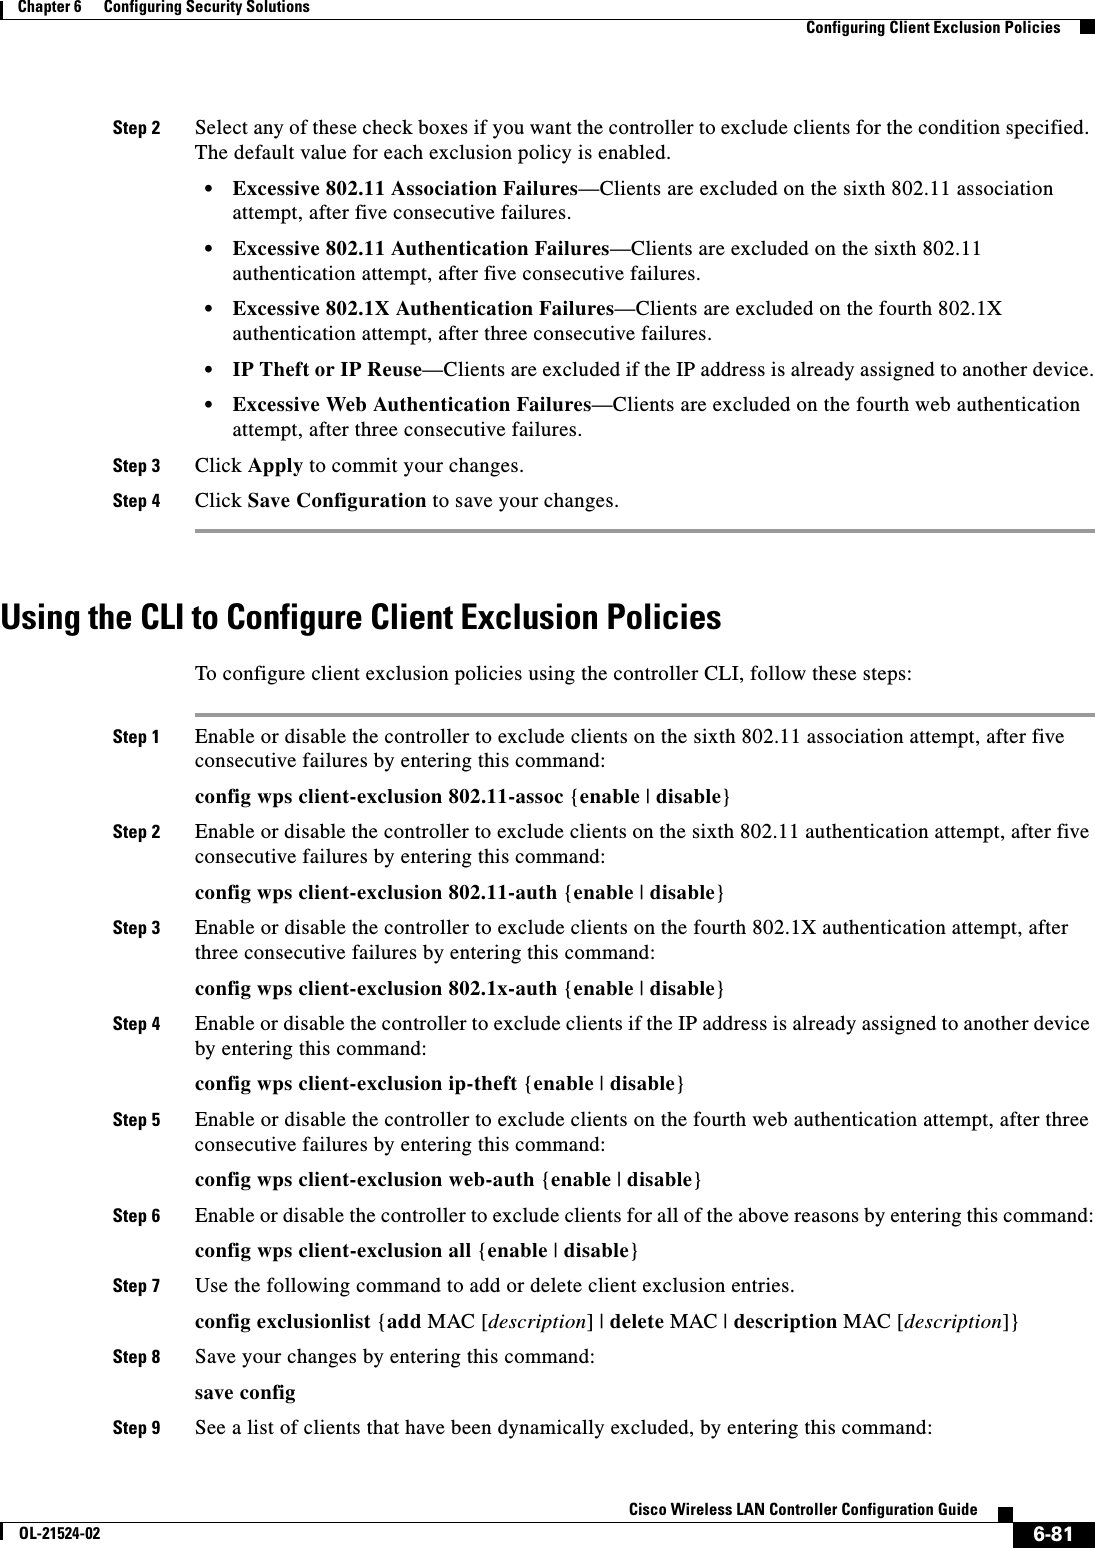  6-81Cisco Wireless LAN Controller Configuration GuideOL-21524-02Chapter 6      Configuring Security Solutions  Configuring Client Exclusion PoliciesStep 2 Select any of these check boxes if you want the controller to exclude clients for the condition specified. The default value for each exclusion policy is enabled.  • Excessive 802.11 Association Failures—Clients are excluded on the sixth 802.11 association attempt, after five consecutive failures.  • Excessive 802.11 Authentication Failures—Clients are excluded on the sixth 802.11 authentication attempt, after five consecutive failures.  • Excessive 802.1X Authentication Failures—Clients are excluded on the fourth 802.1X authentication attempt, after three consecutive failures.  • IP Theft or IP Reuse—Clients are excluded if the IP address is already assigned to another device.  • Excessive Web Authentication Failures—Clients are excluded on the fourth web authentication attempt, after three consecutive failures.Step 3 Click Apply to commit your changes.Step 4 Click Save Configuration to save your changes.Using the CLI to Configure Client Exclusion PoliciesTo configure client exclusion policies using the controller CLI, follow these steps:Step 1 Enable or disable the controller to exclude clients on the sixth 802.11 association attempt, after five consecutive failures by entering this command:config wps client-exclusion 802.11-assoc {enable | disable}Step 2 Enable or disable the controller to exclude clients on the sixth 802.11 authentication attempt, after five consecutive failures by entering this command:config wps client-exclusion 802.11-auth {enable | disable}Step 3 Enable or disable the controller to exclude clients on the fourth 802.1X authentication attempt, after three consecutive failures by entering this command:config wps client-exclusion 802.1x-auth {enable | disable}Step 4 Enable or disable the controller to exclude clients if the IP address is already assigned to another device by entering this command:config wps client-exclusion ip-theft {enable | disable}Step 5 Enable or disable the controller to exclude clients on the fourth web authentication attempt, after three consecutive failures by entering this command:config wps client-exclusion web-auth {enable | disable}Step 6 Enable or disable the controller to exclude clients for all of the above reasons by entering this command:config wps client-exclusion all {enable | disable}Step 7 Use the following command to add or delete client exclusion entries.config exclusionlist {add MAC [description] | delete MAC | description MAC [description]}Step 8 Save your changes by entering this command:save configStep 9 See a list of clients that have been dynamically excluded, by entering this command: